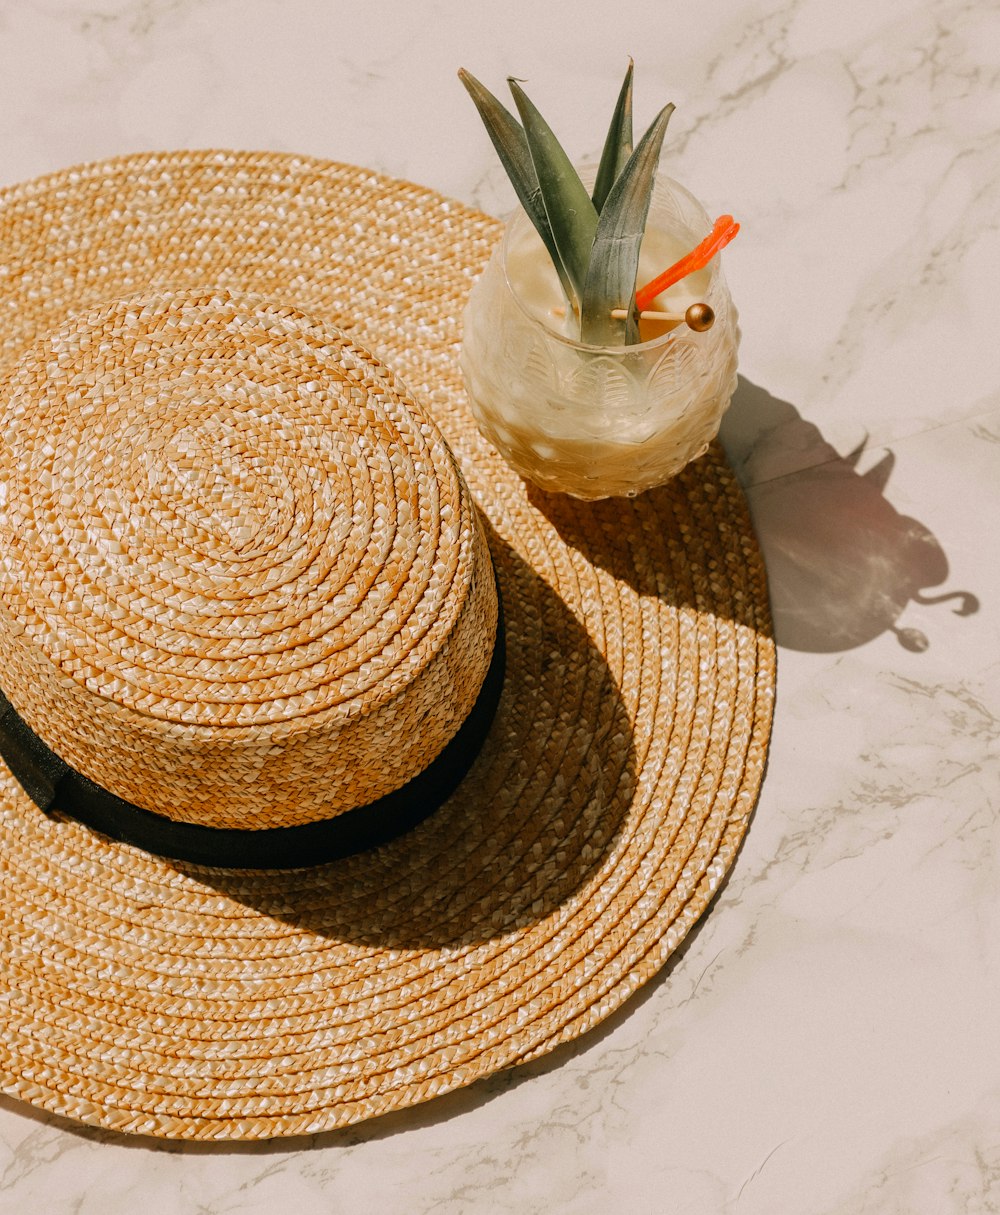 pineapple glass drink on brown sunhat